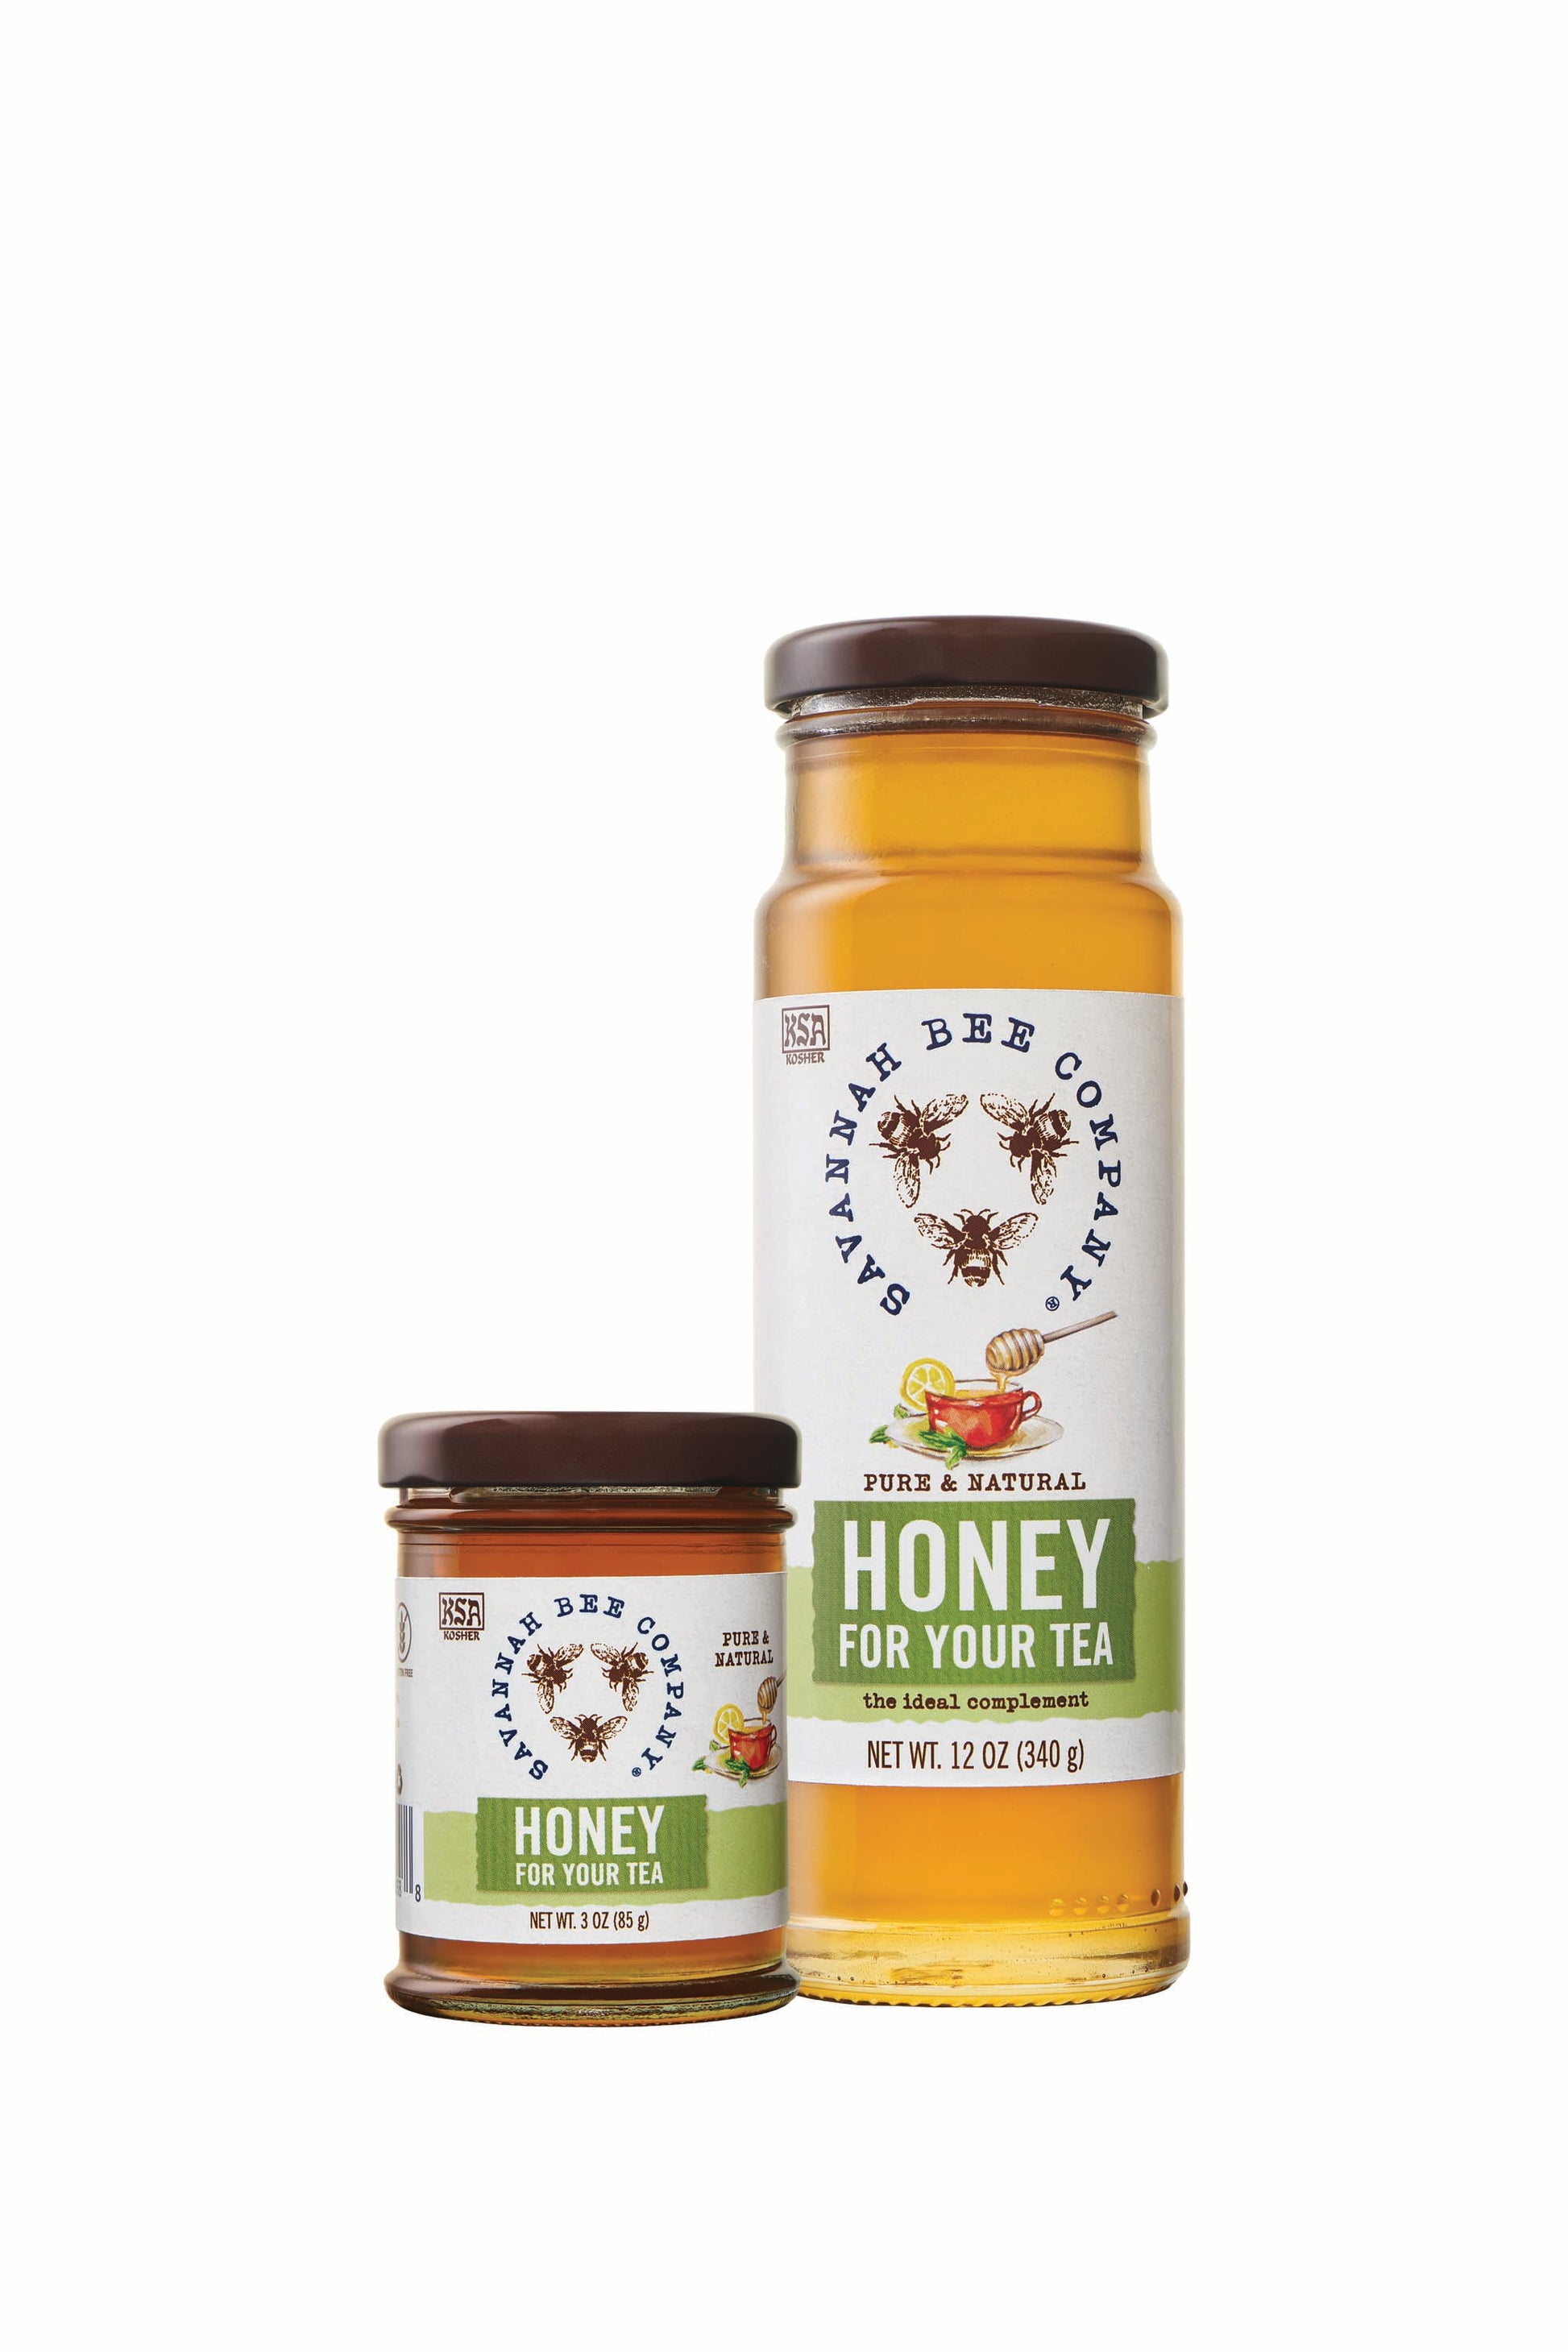 Honey for tes 12 ounce and 3 ounce studio shot.